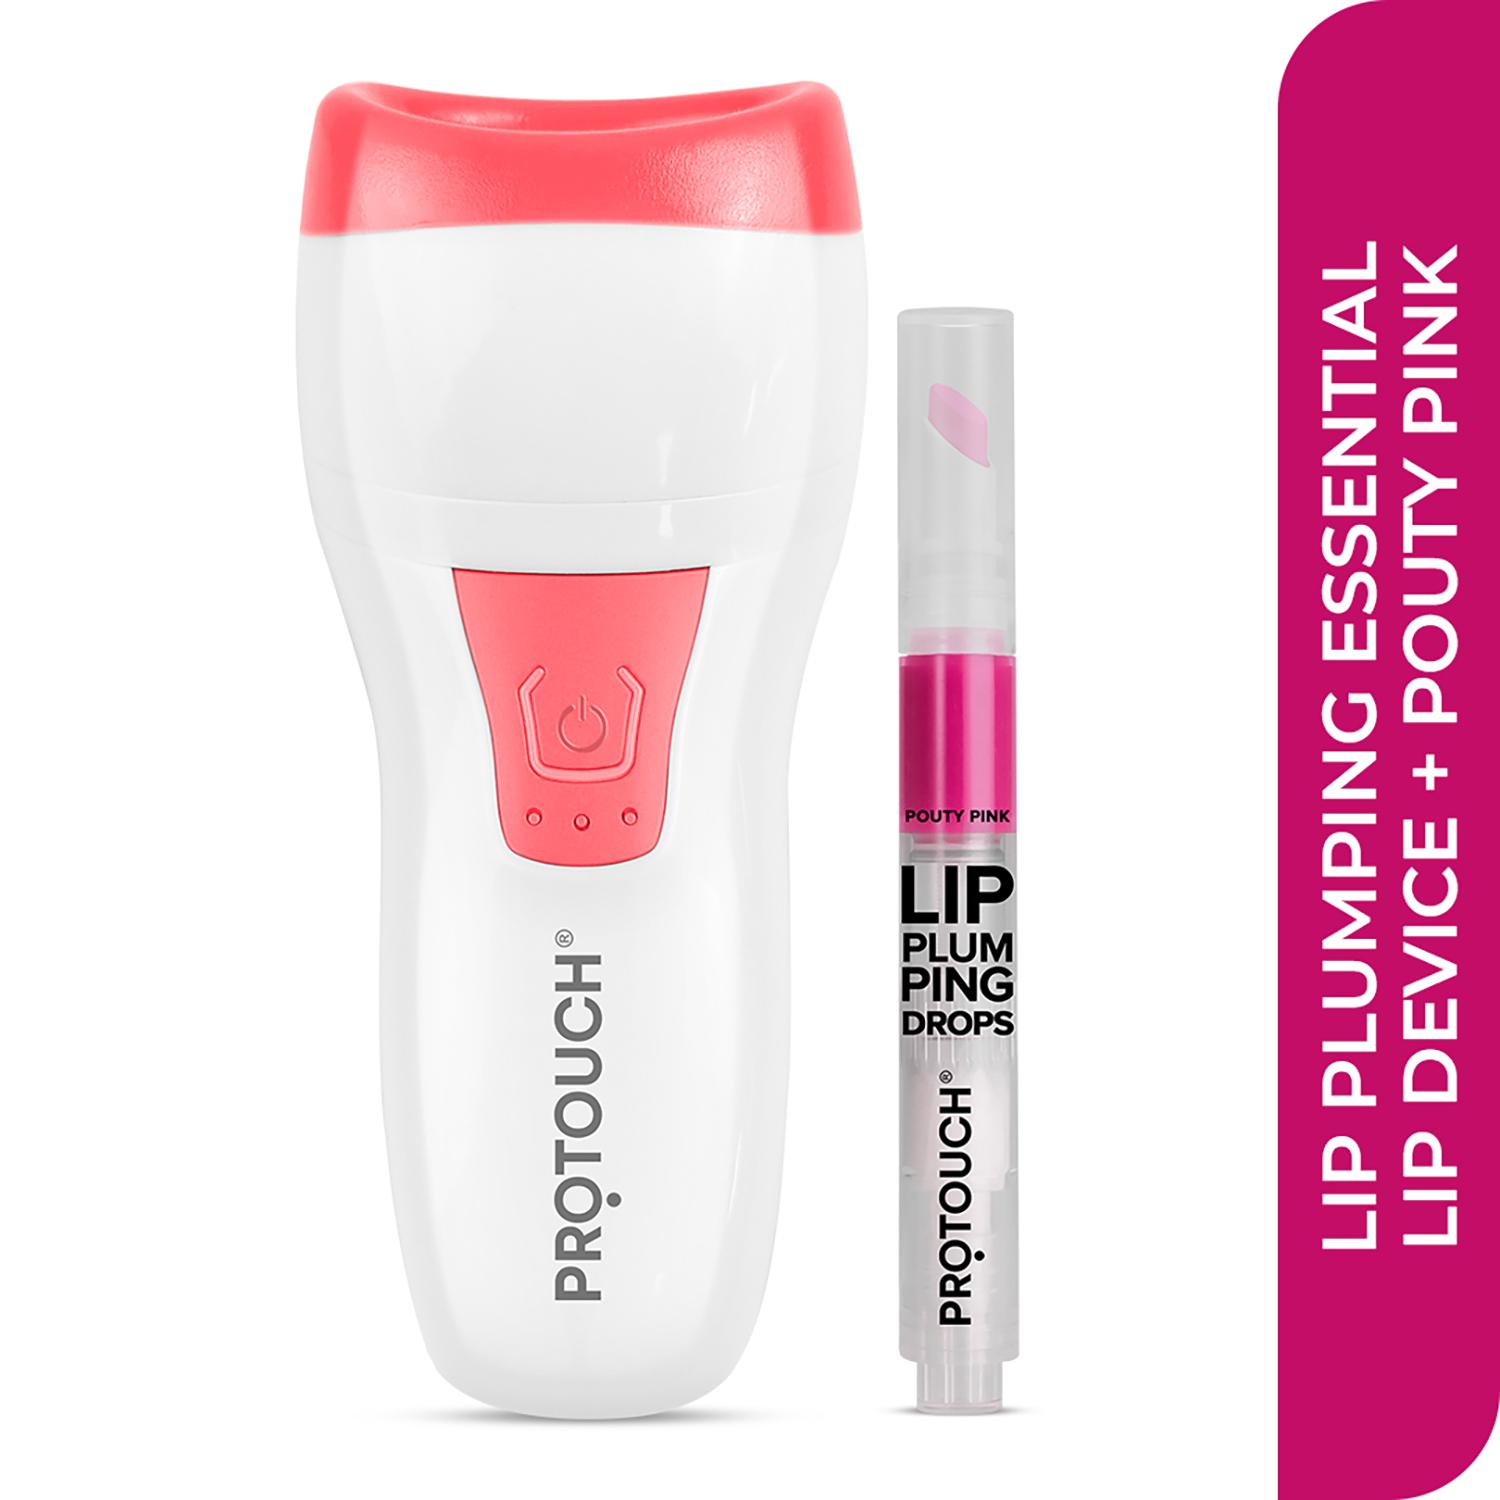 Protouch | PROTOUCH Red and White Pro Lips Lip Plumper Device, Pouty Pink Lip Plumping drops Combo